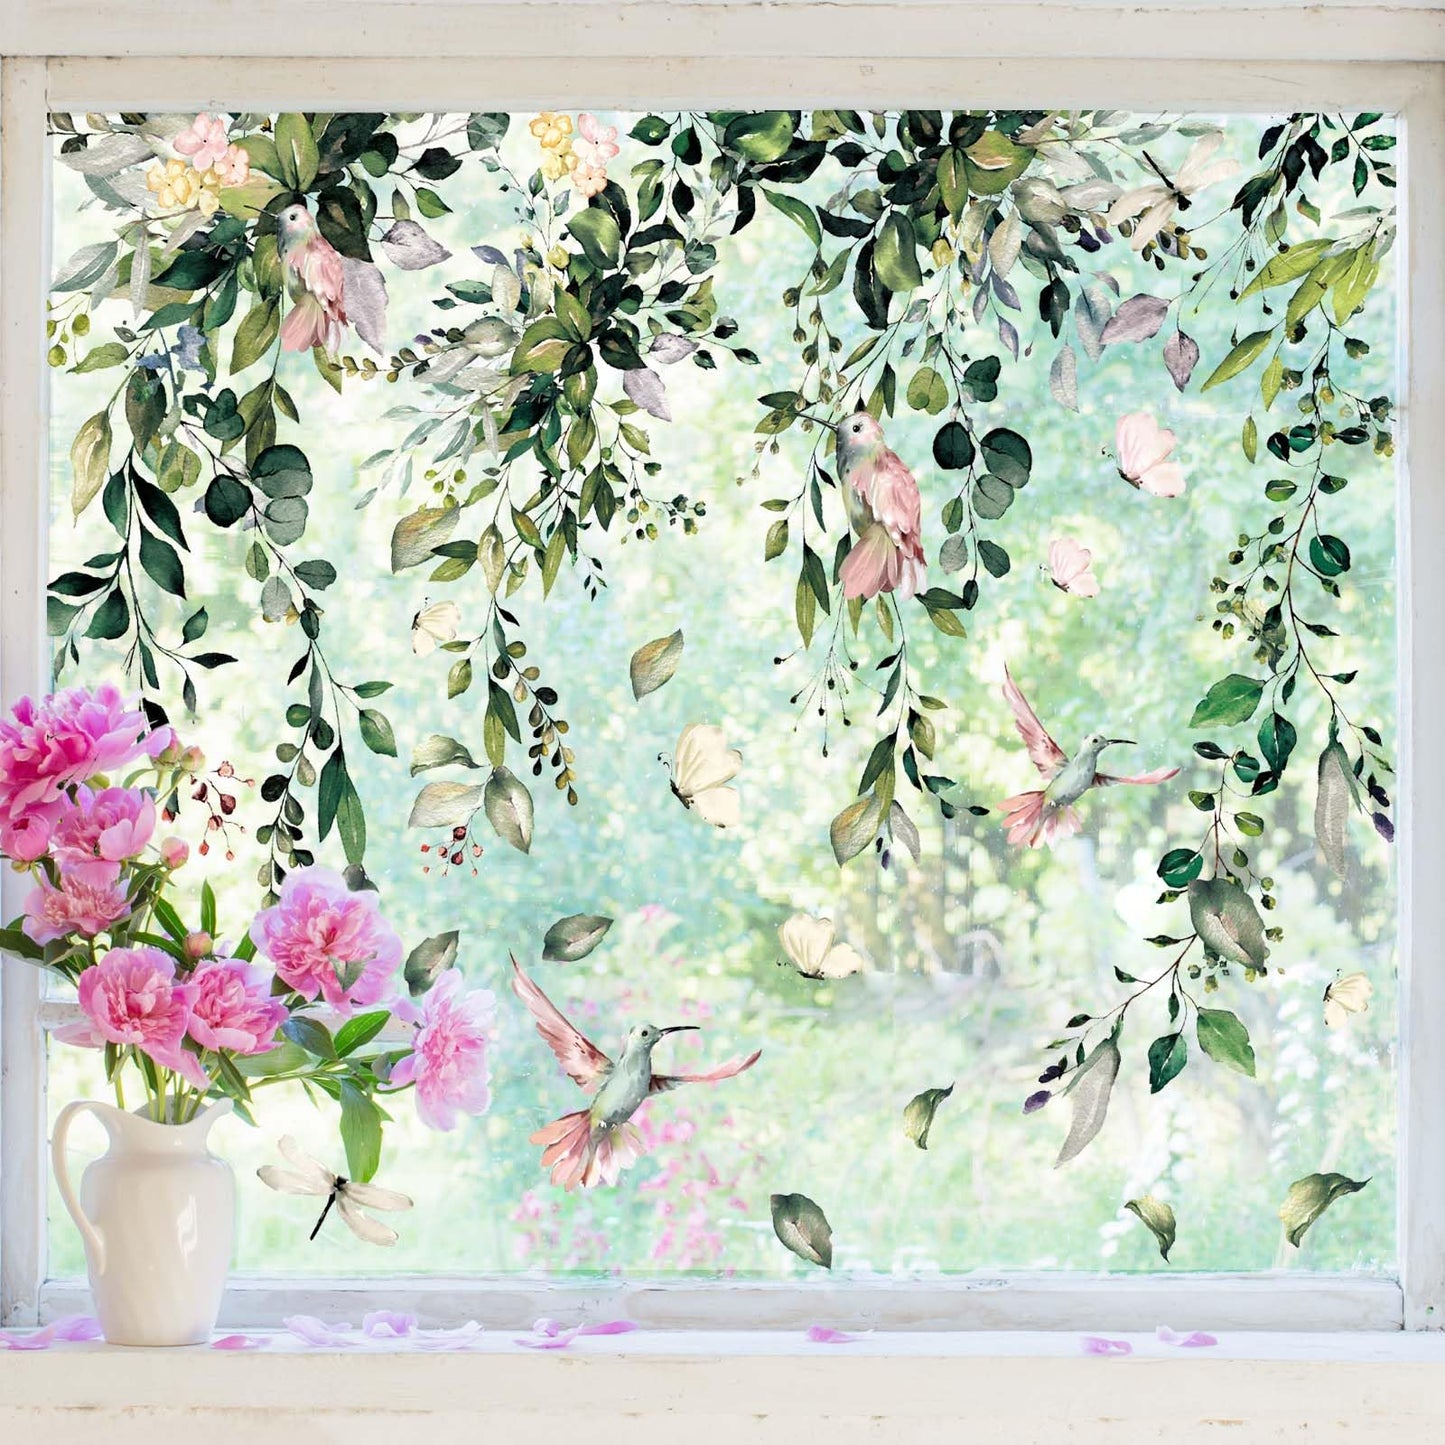 Whaline 9 Sheets Spring Flowers Window Clings Eucalyptus Flower Window Stickers Summer Plant Hanging Vine Floral Leaf Reusable Static Window Decals for Wedding Party Home Decor Supplies